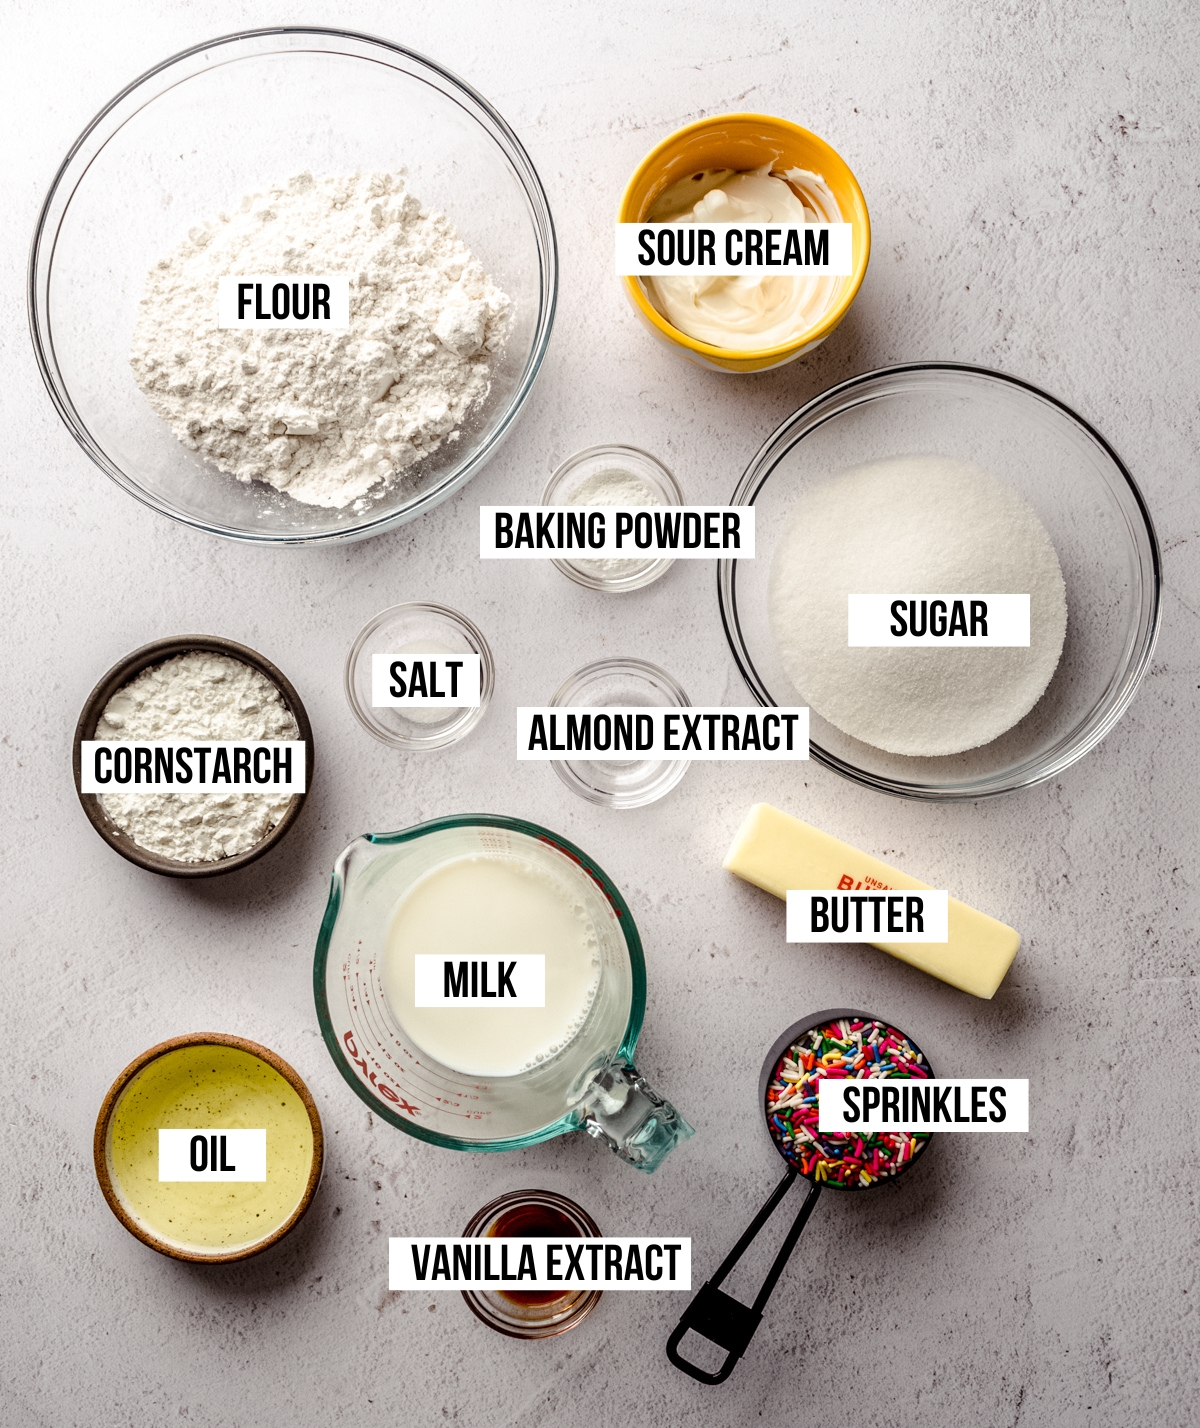 Aerial photo of ingredients for funfetti cupcakes on a surface with text overlay labeling each ingredient.